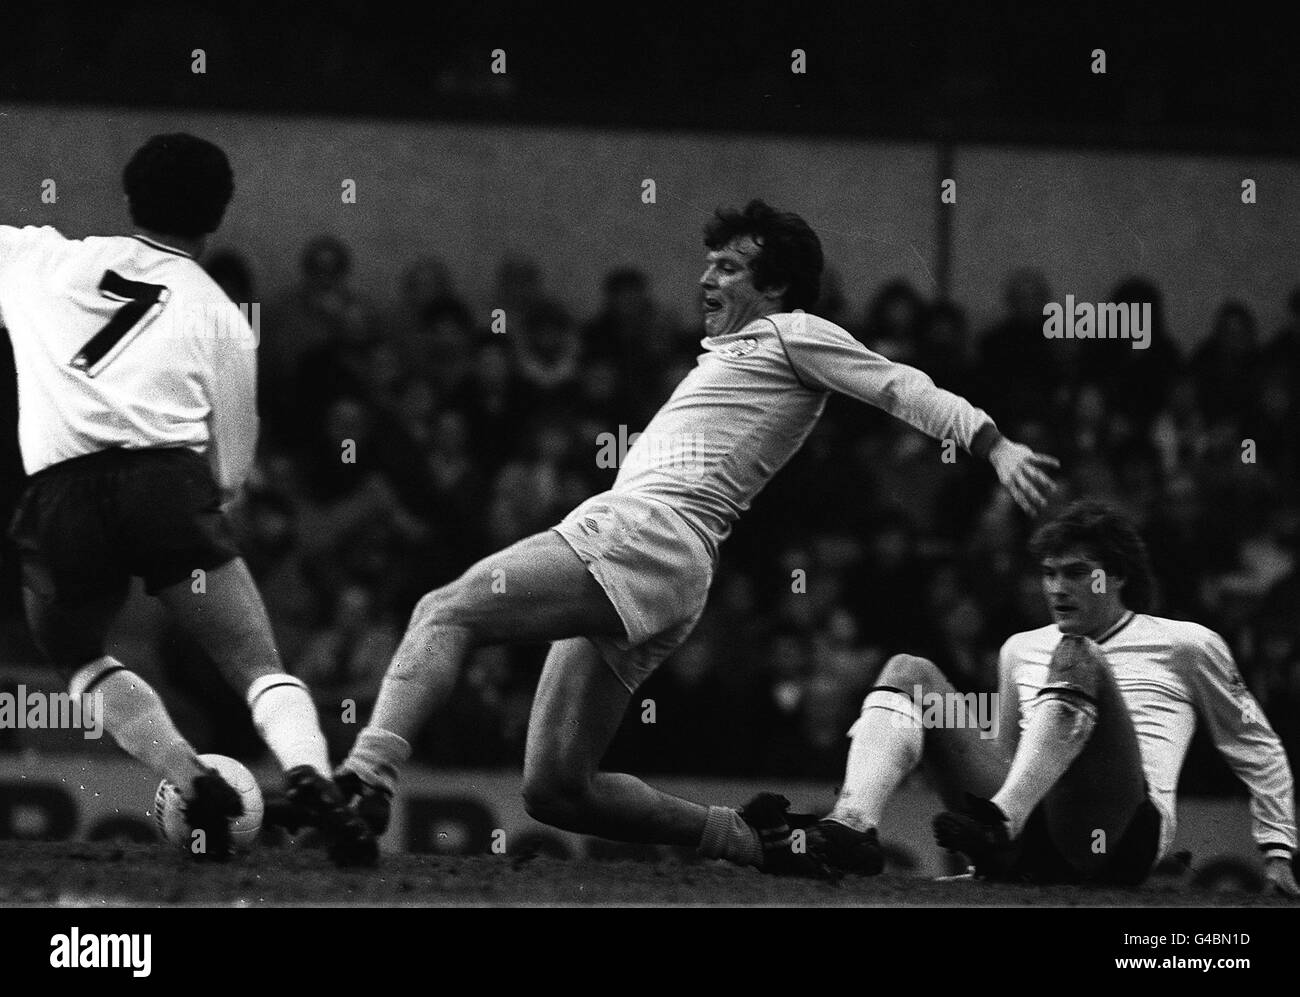 PA NEWS PHOTO 11/3/82 EDDIE GRAY (SCOTTISH INTERNATIONAL) IN THE THICK OF THE ACTION FOR LEEDS UNITED F.C. AT THEIR HOME GROUND ELLAND ROAD IN THEIR MATCH AGAINST TOTTENHAM HOTSPUR. Stock Photo